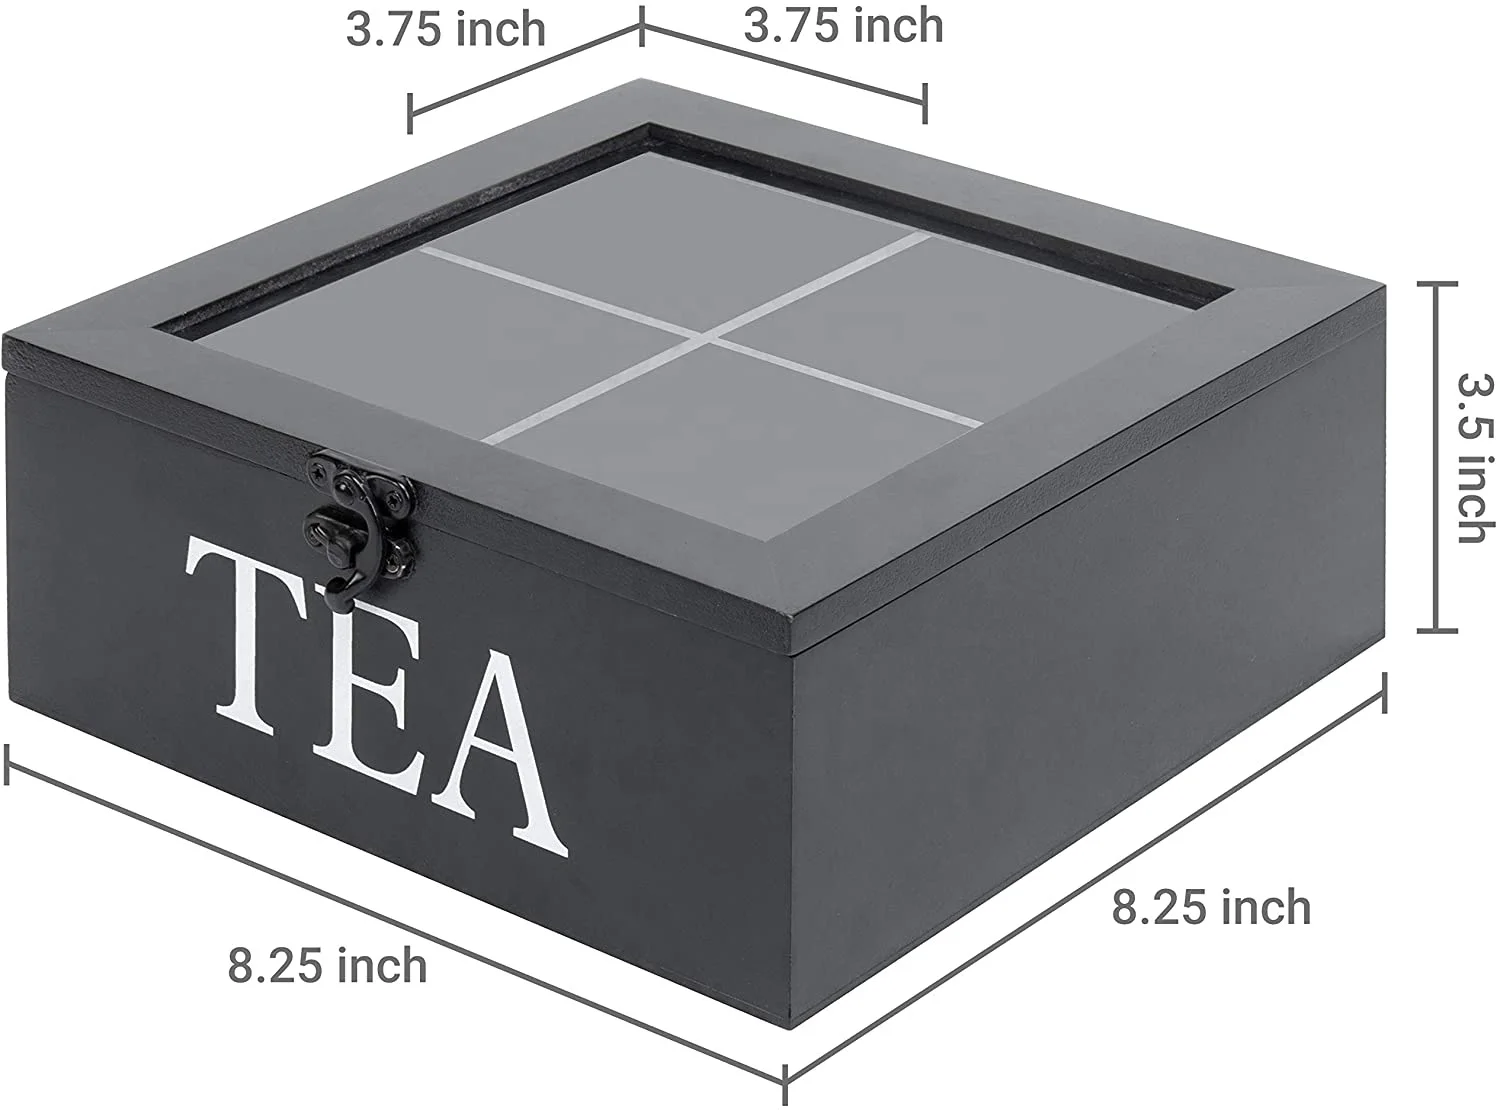 Custom Wooden Boxes With Hinged Lid Rustic Wood Tea Storage Box Tea Bag Organizer Display Box with Clear Lid and Latch